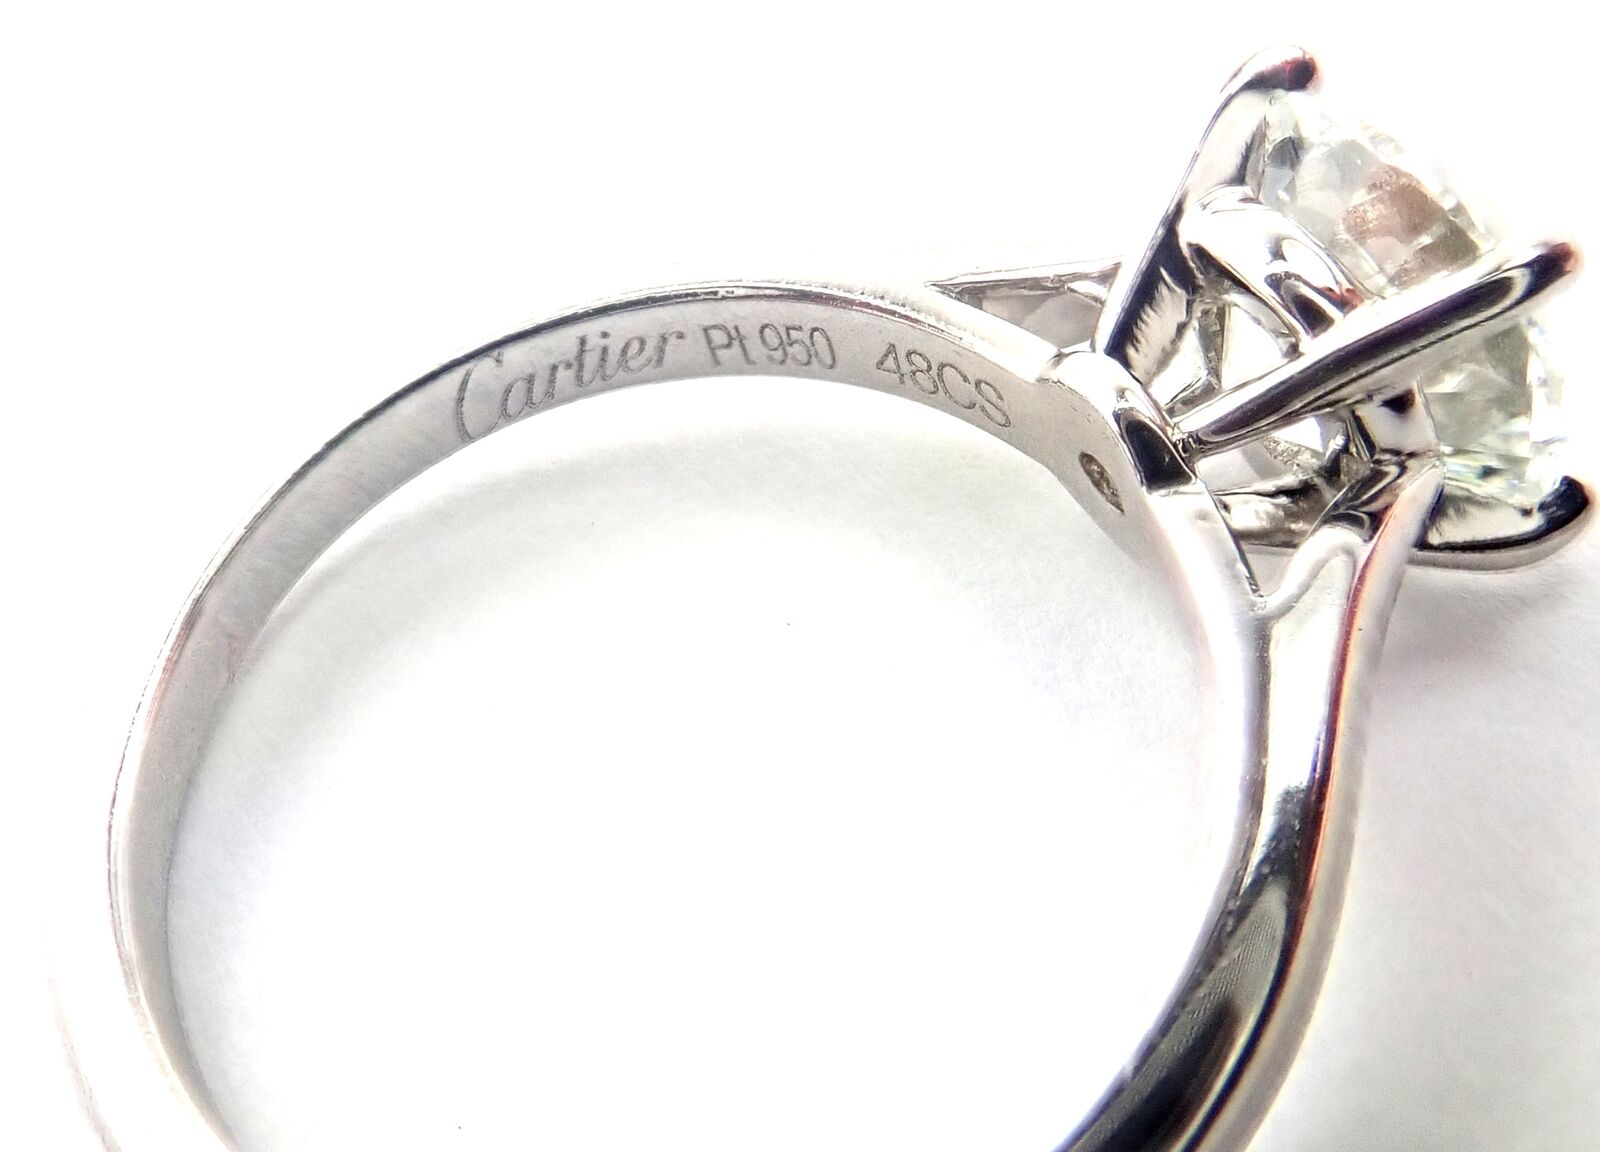 Cartier Jewelry & Watches:Fine Jewelry:Rings Authentic! Cartier Platinum 1.30ct VS1/F Diamond Solitaire Engagement Ring GIA